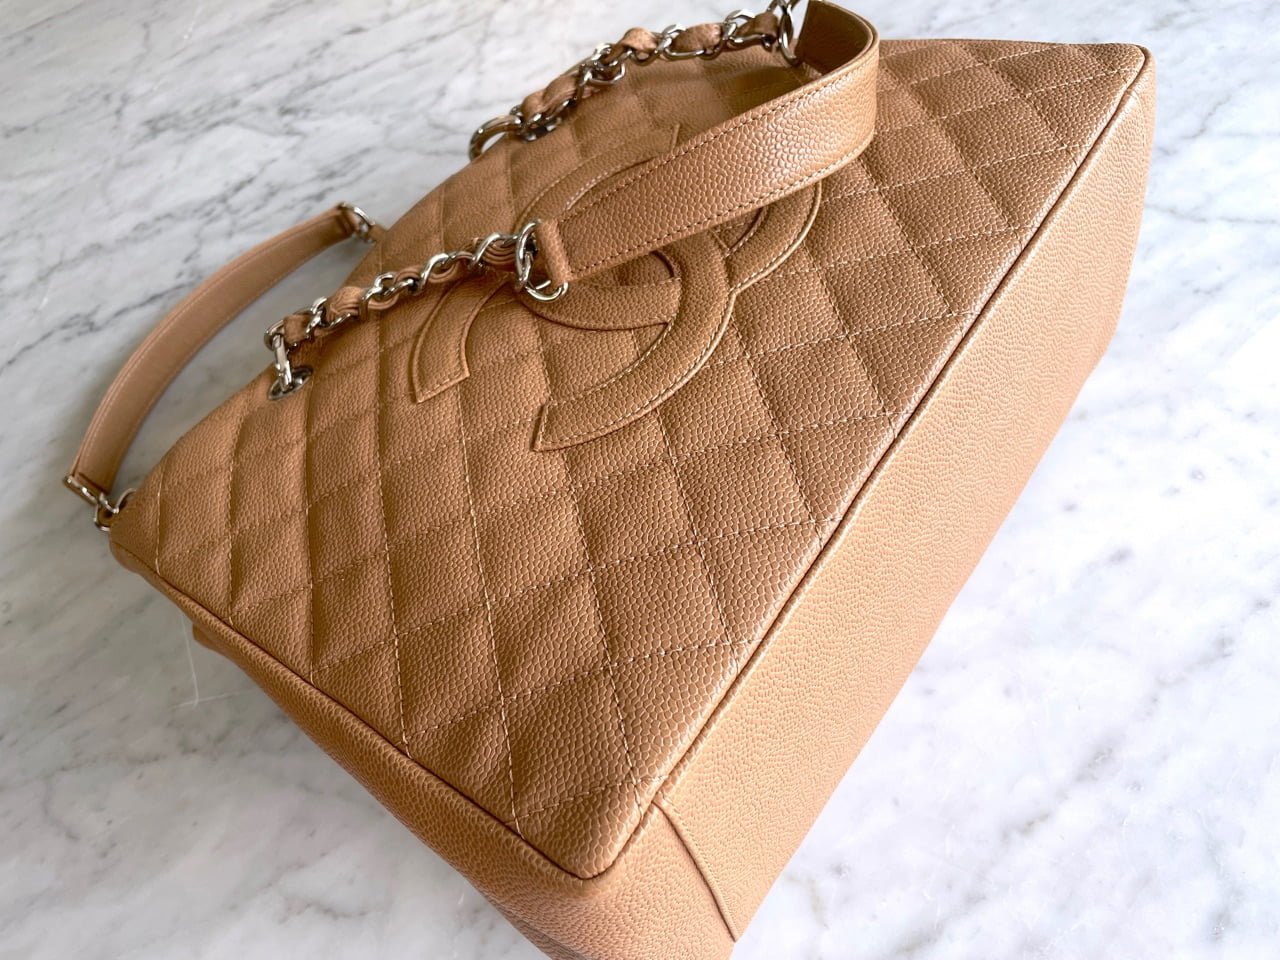 CHANEL Caviar Quilted Handbag in Brown - More Than You Can Imagine